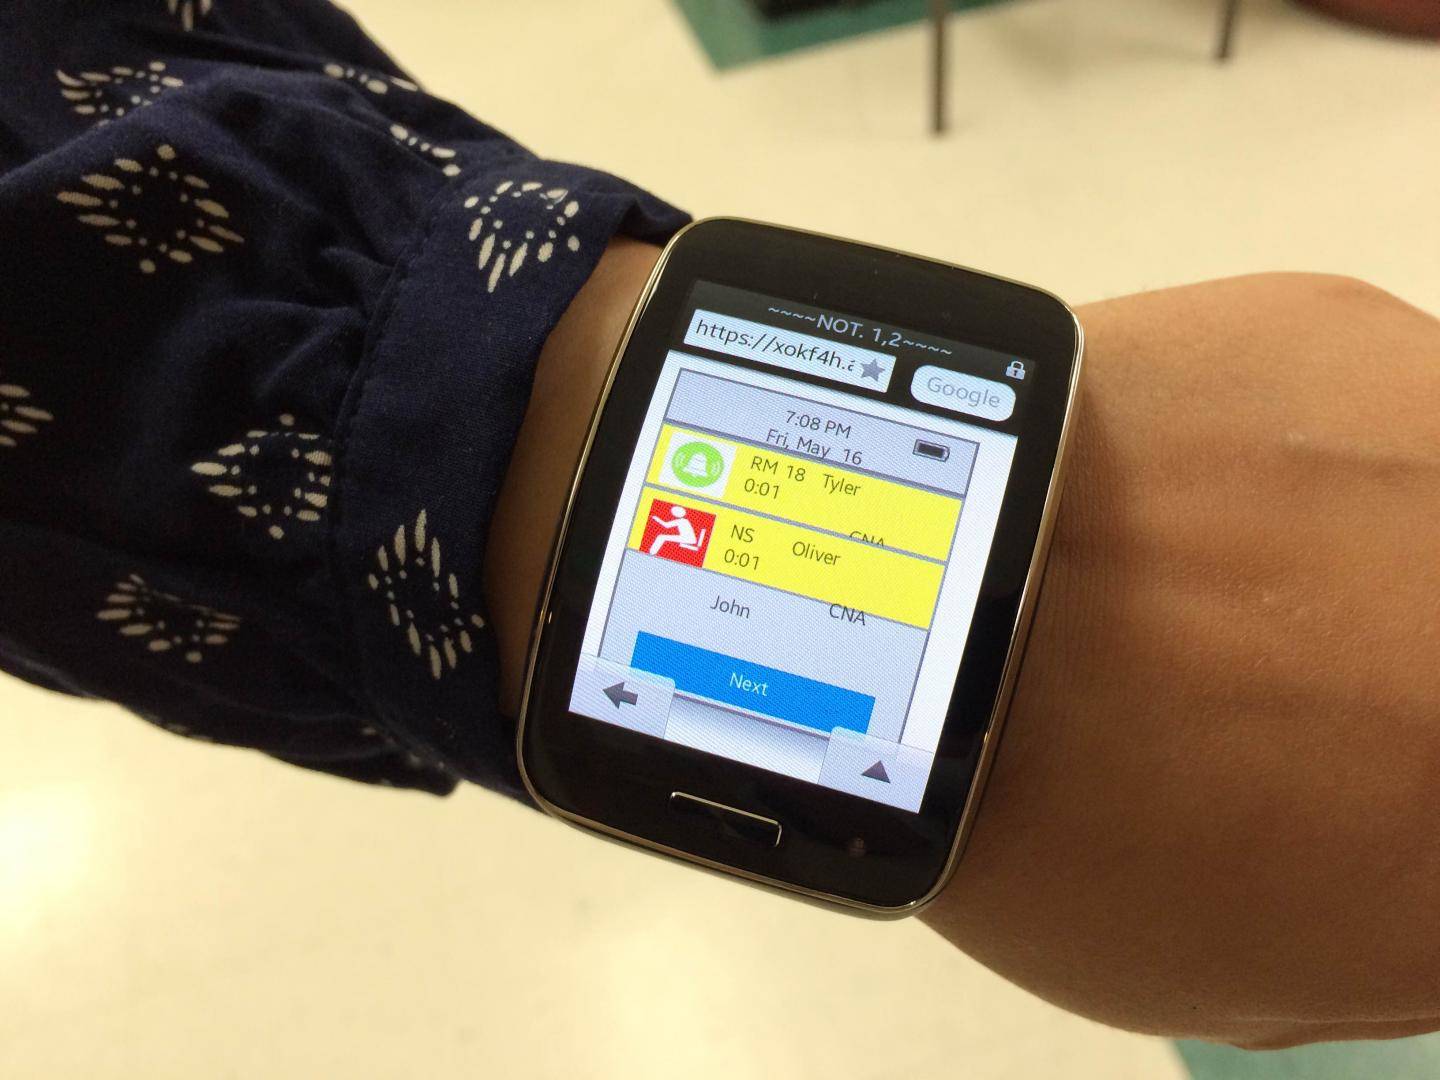 Binghamton University researchers Assistant Professor of Systems Science and Industrial Engineering Huiyang Li and PhD candidate Haneen Ali are developing a smartwatch application to improve communication and notification systems for nursing homes, which are often faulty and inefficient.